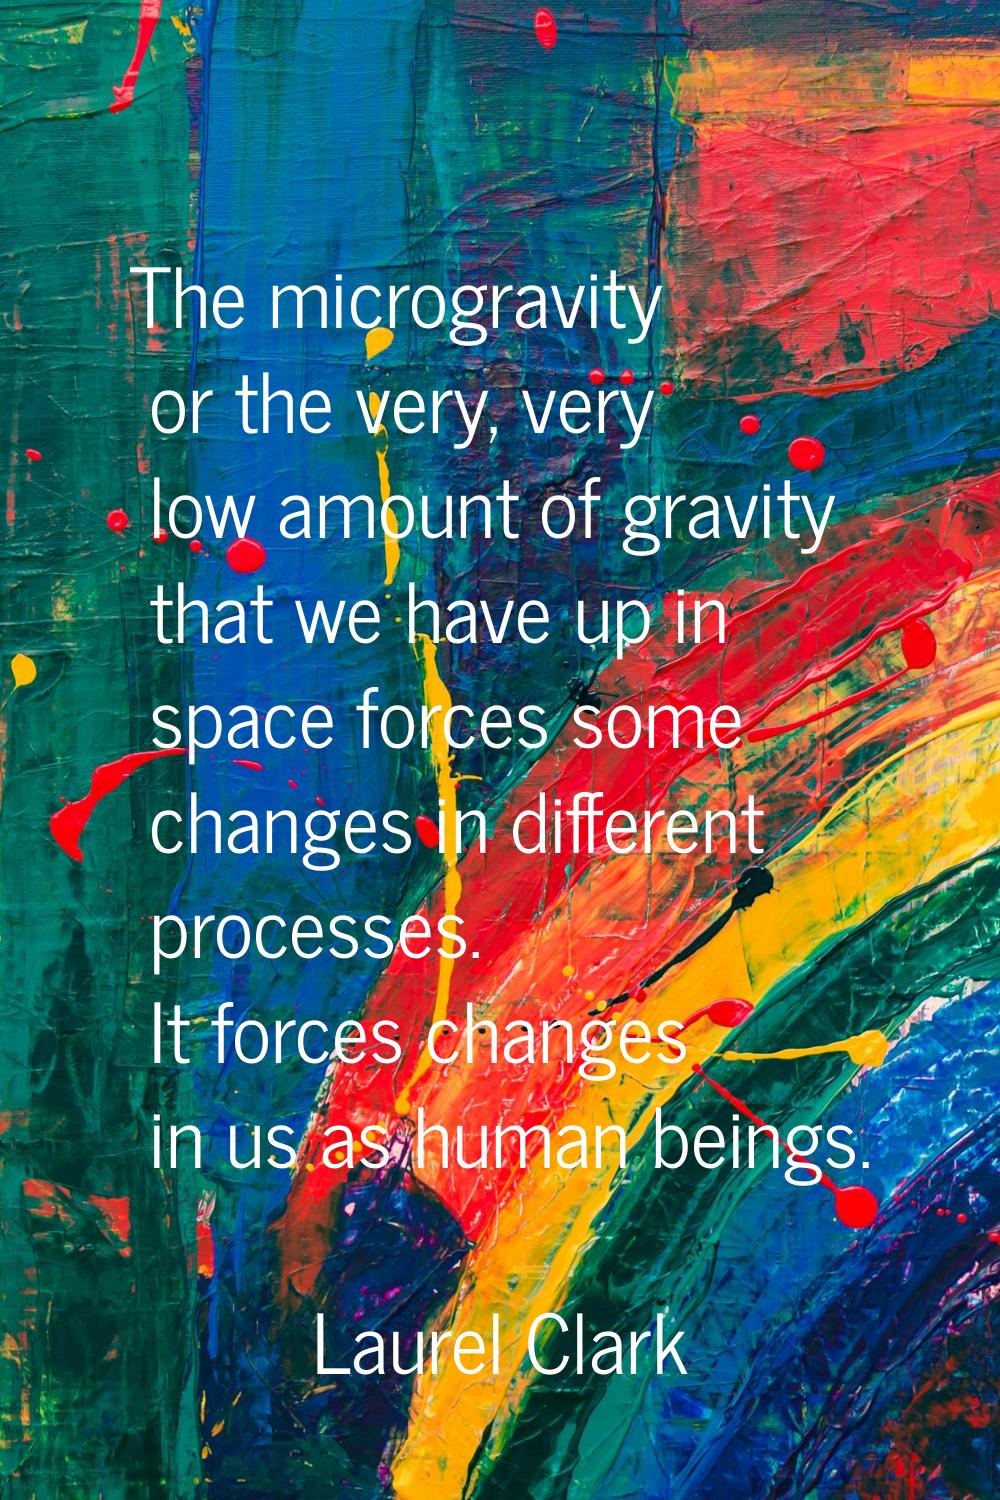 The microgravity or the very, very low amount of gravity that we have up in space forces some chang